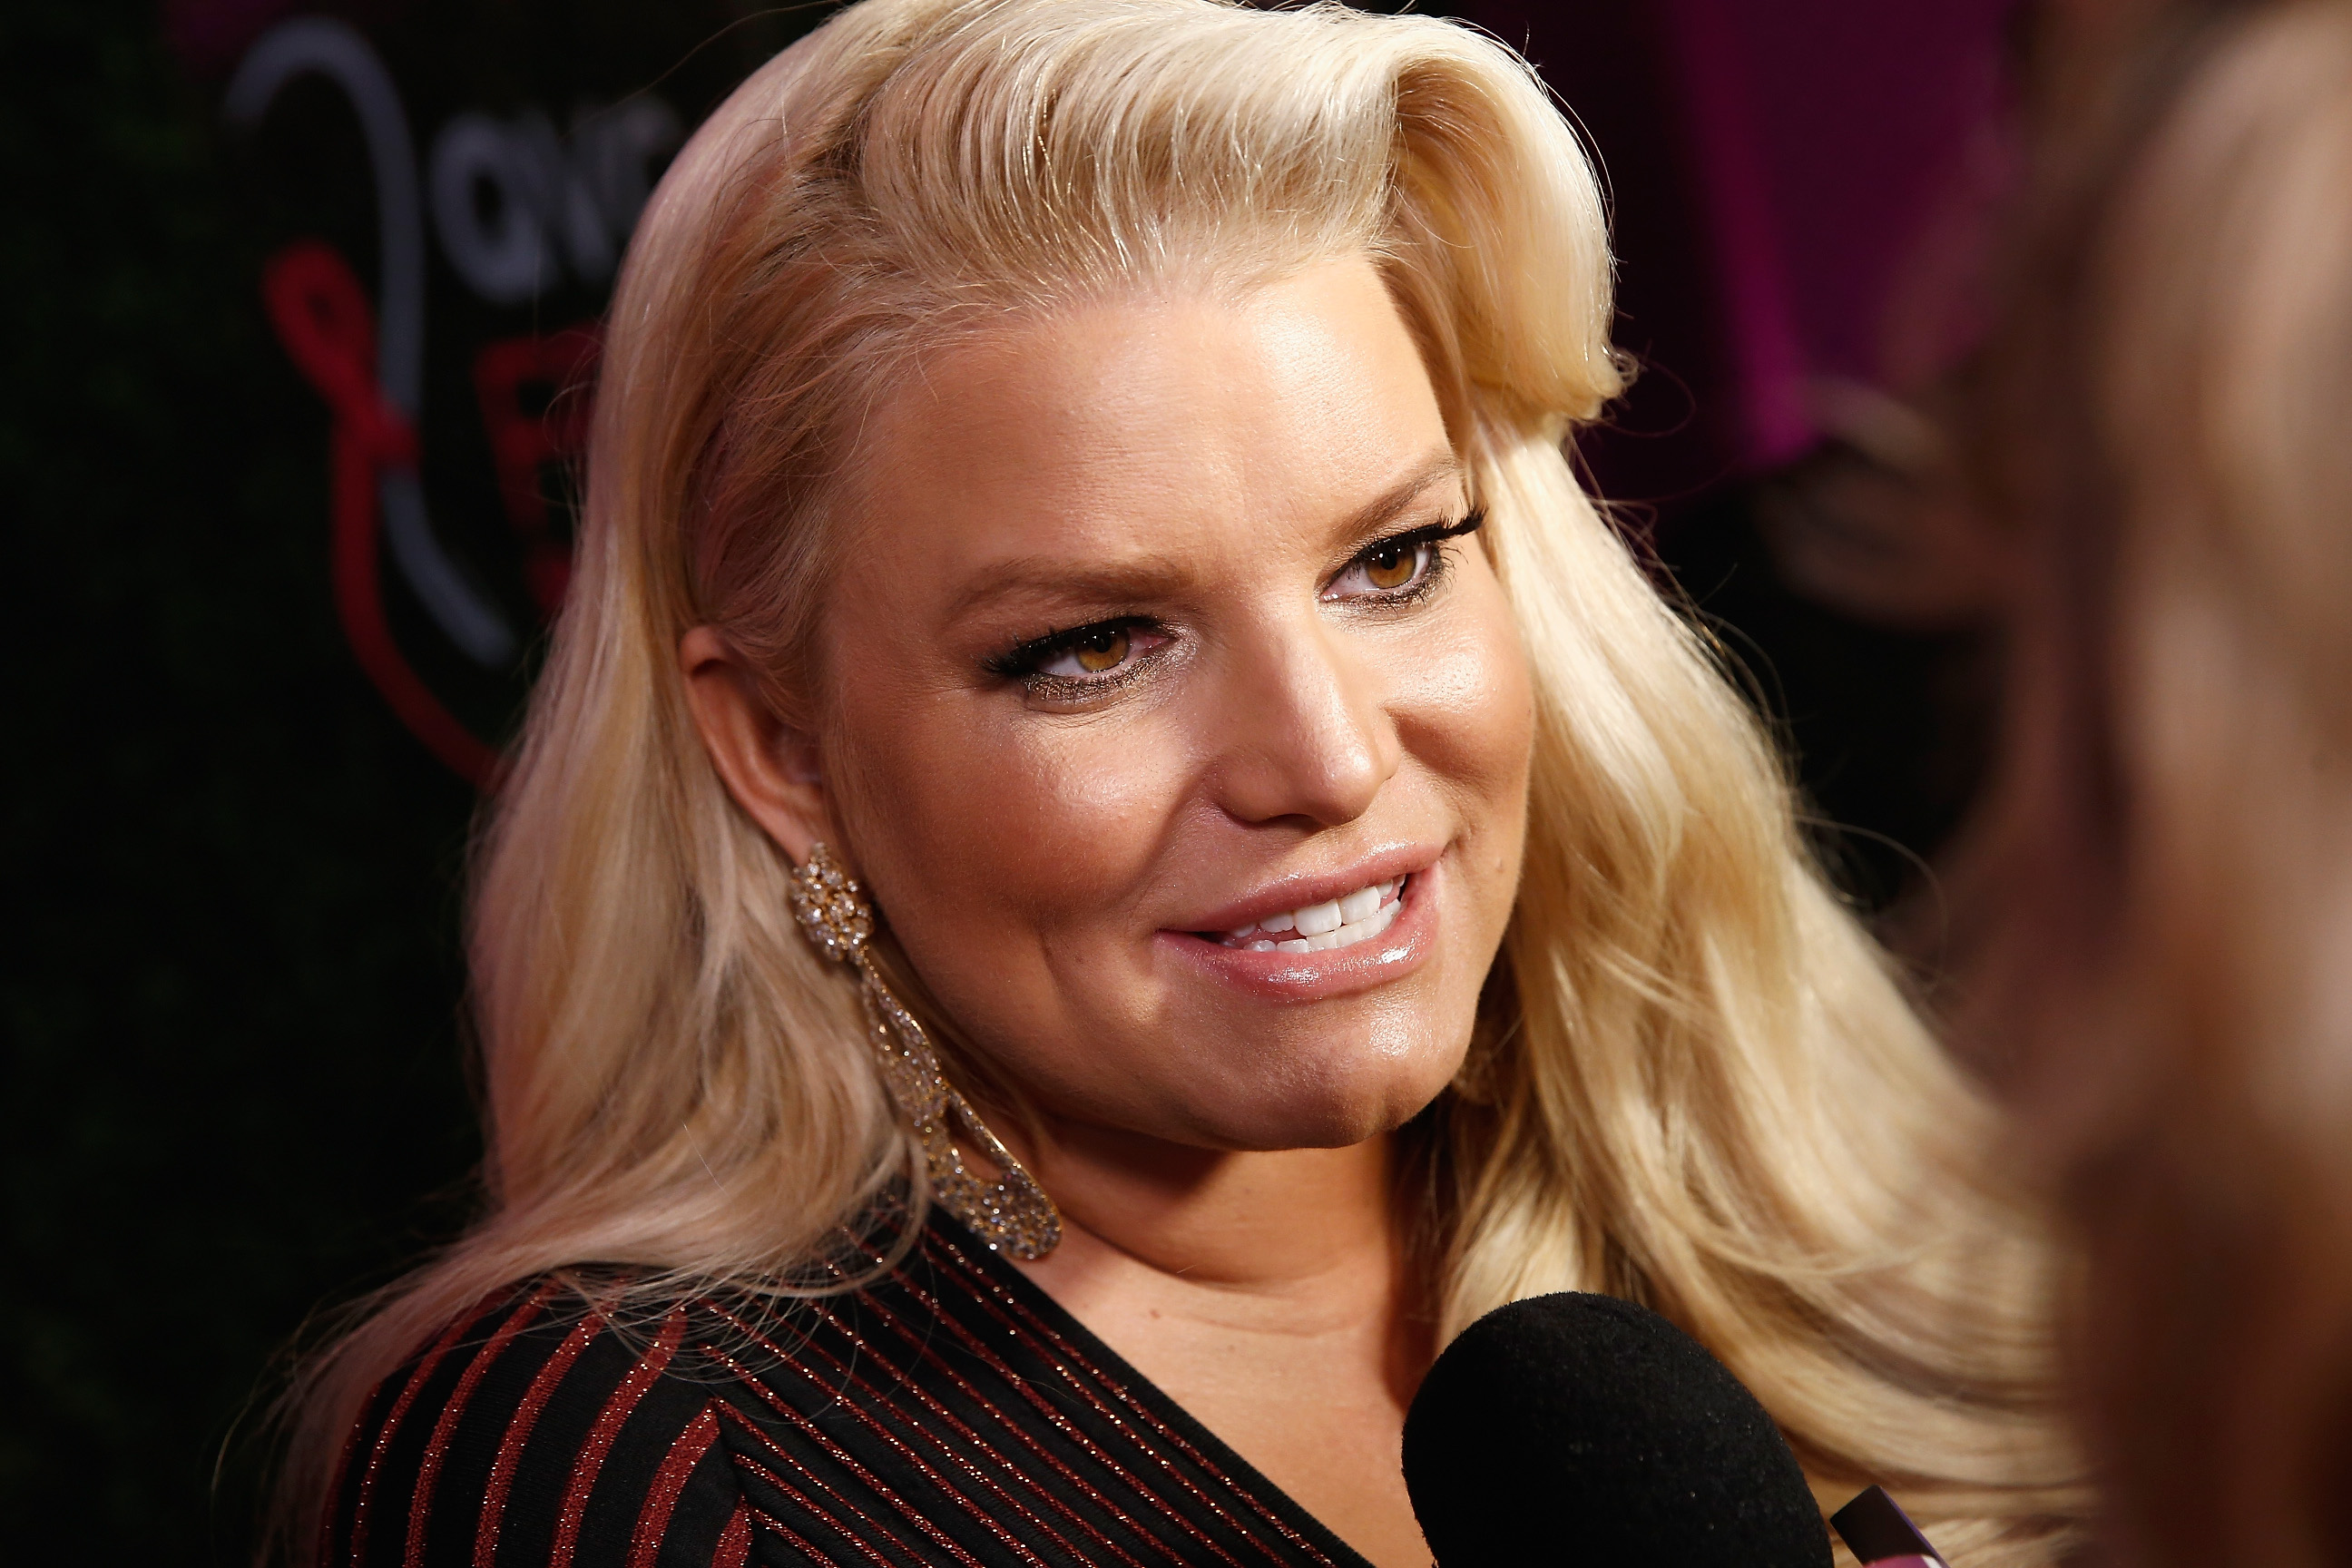 Jessica Simpson smiles for a photo on the red carpet